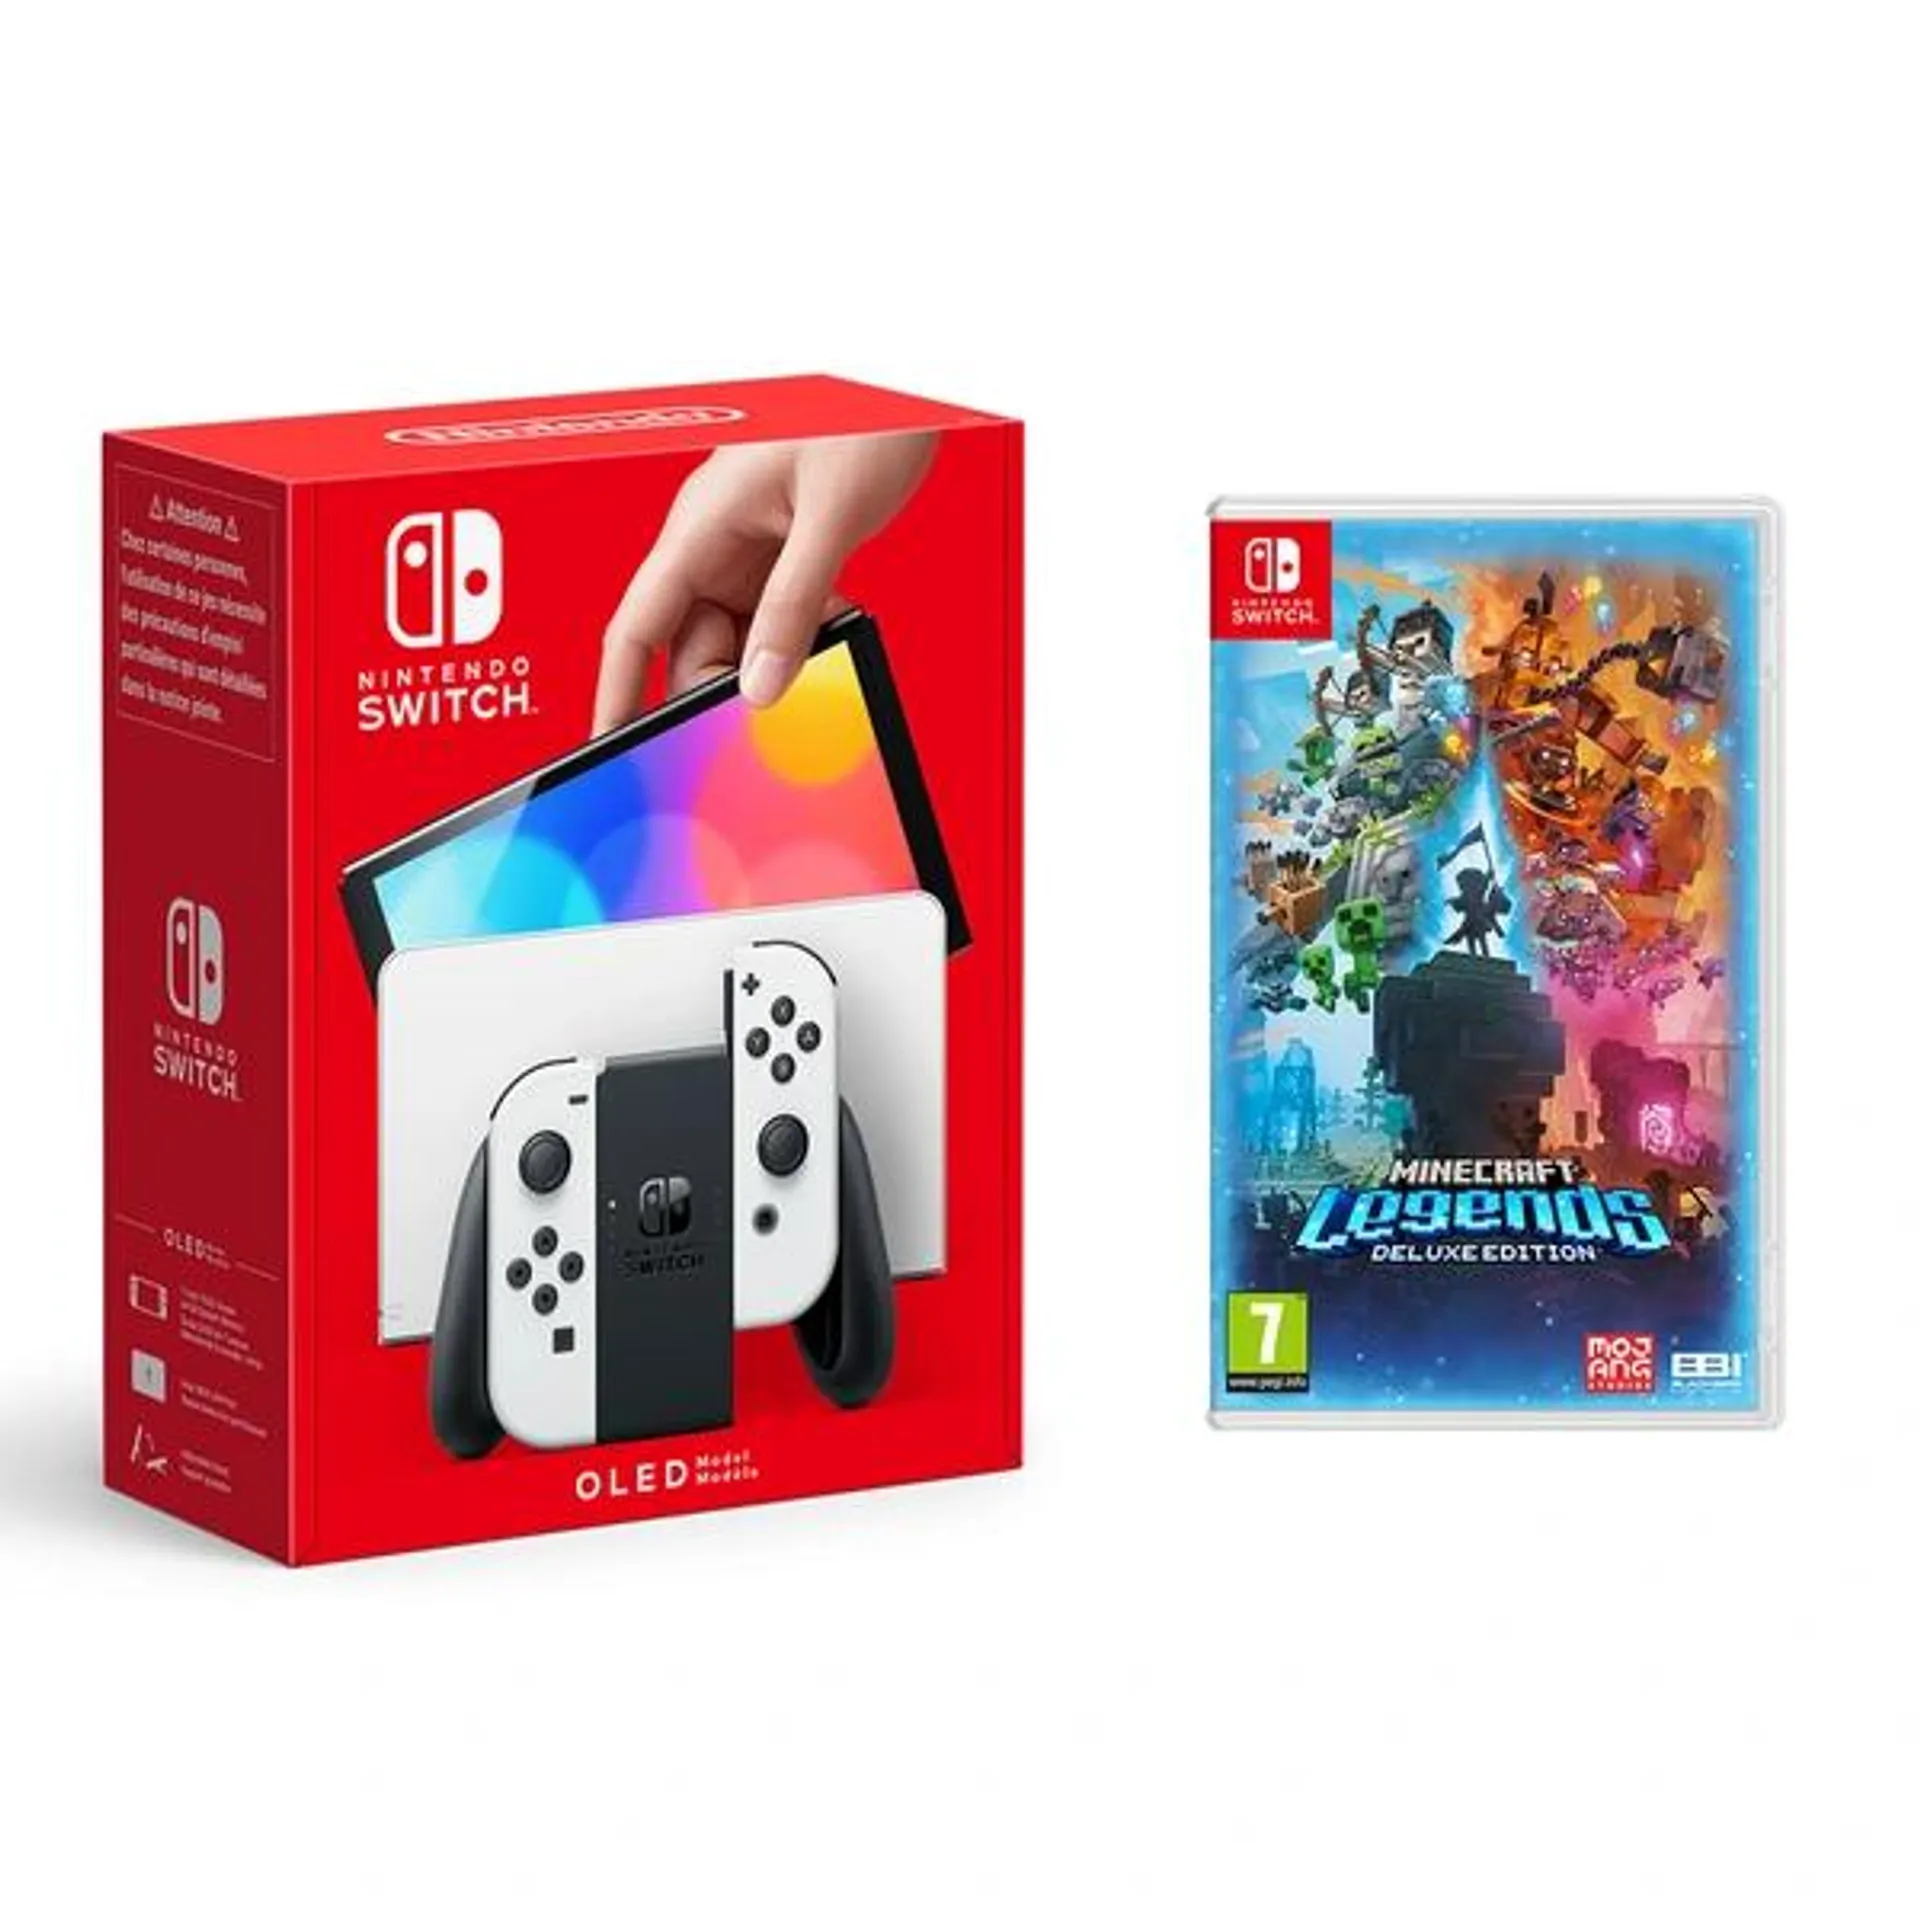 Nintendo Switch OLED White & Minecraft Legends Deluxe Edition